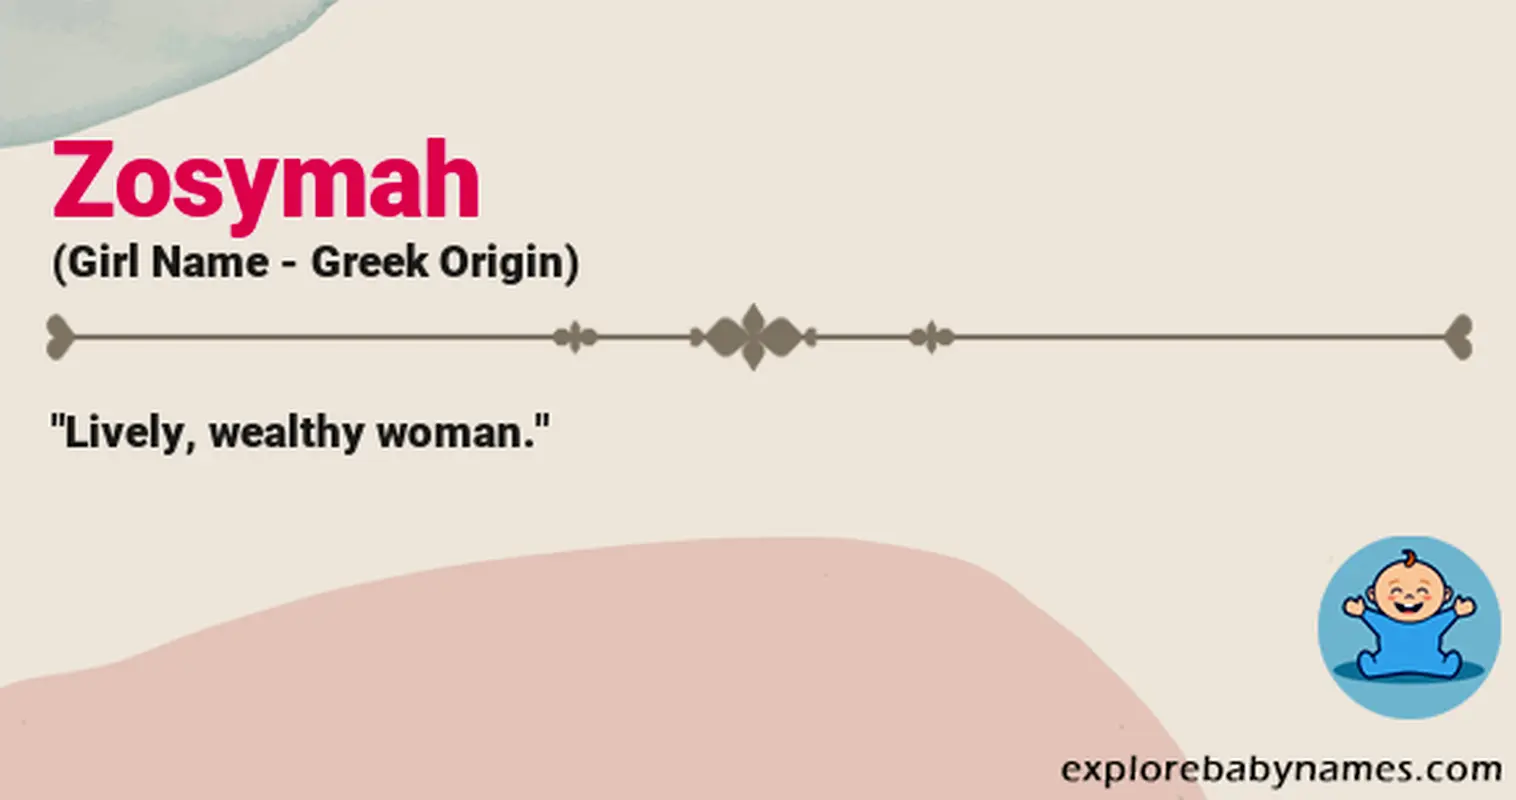 Meaning of Zosymah